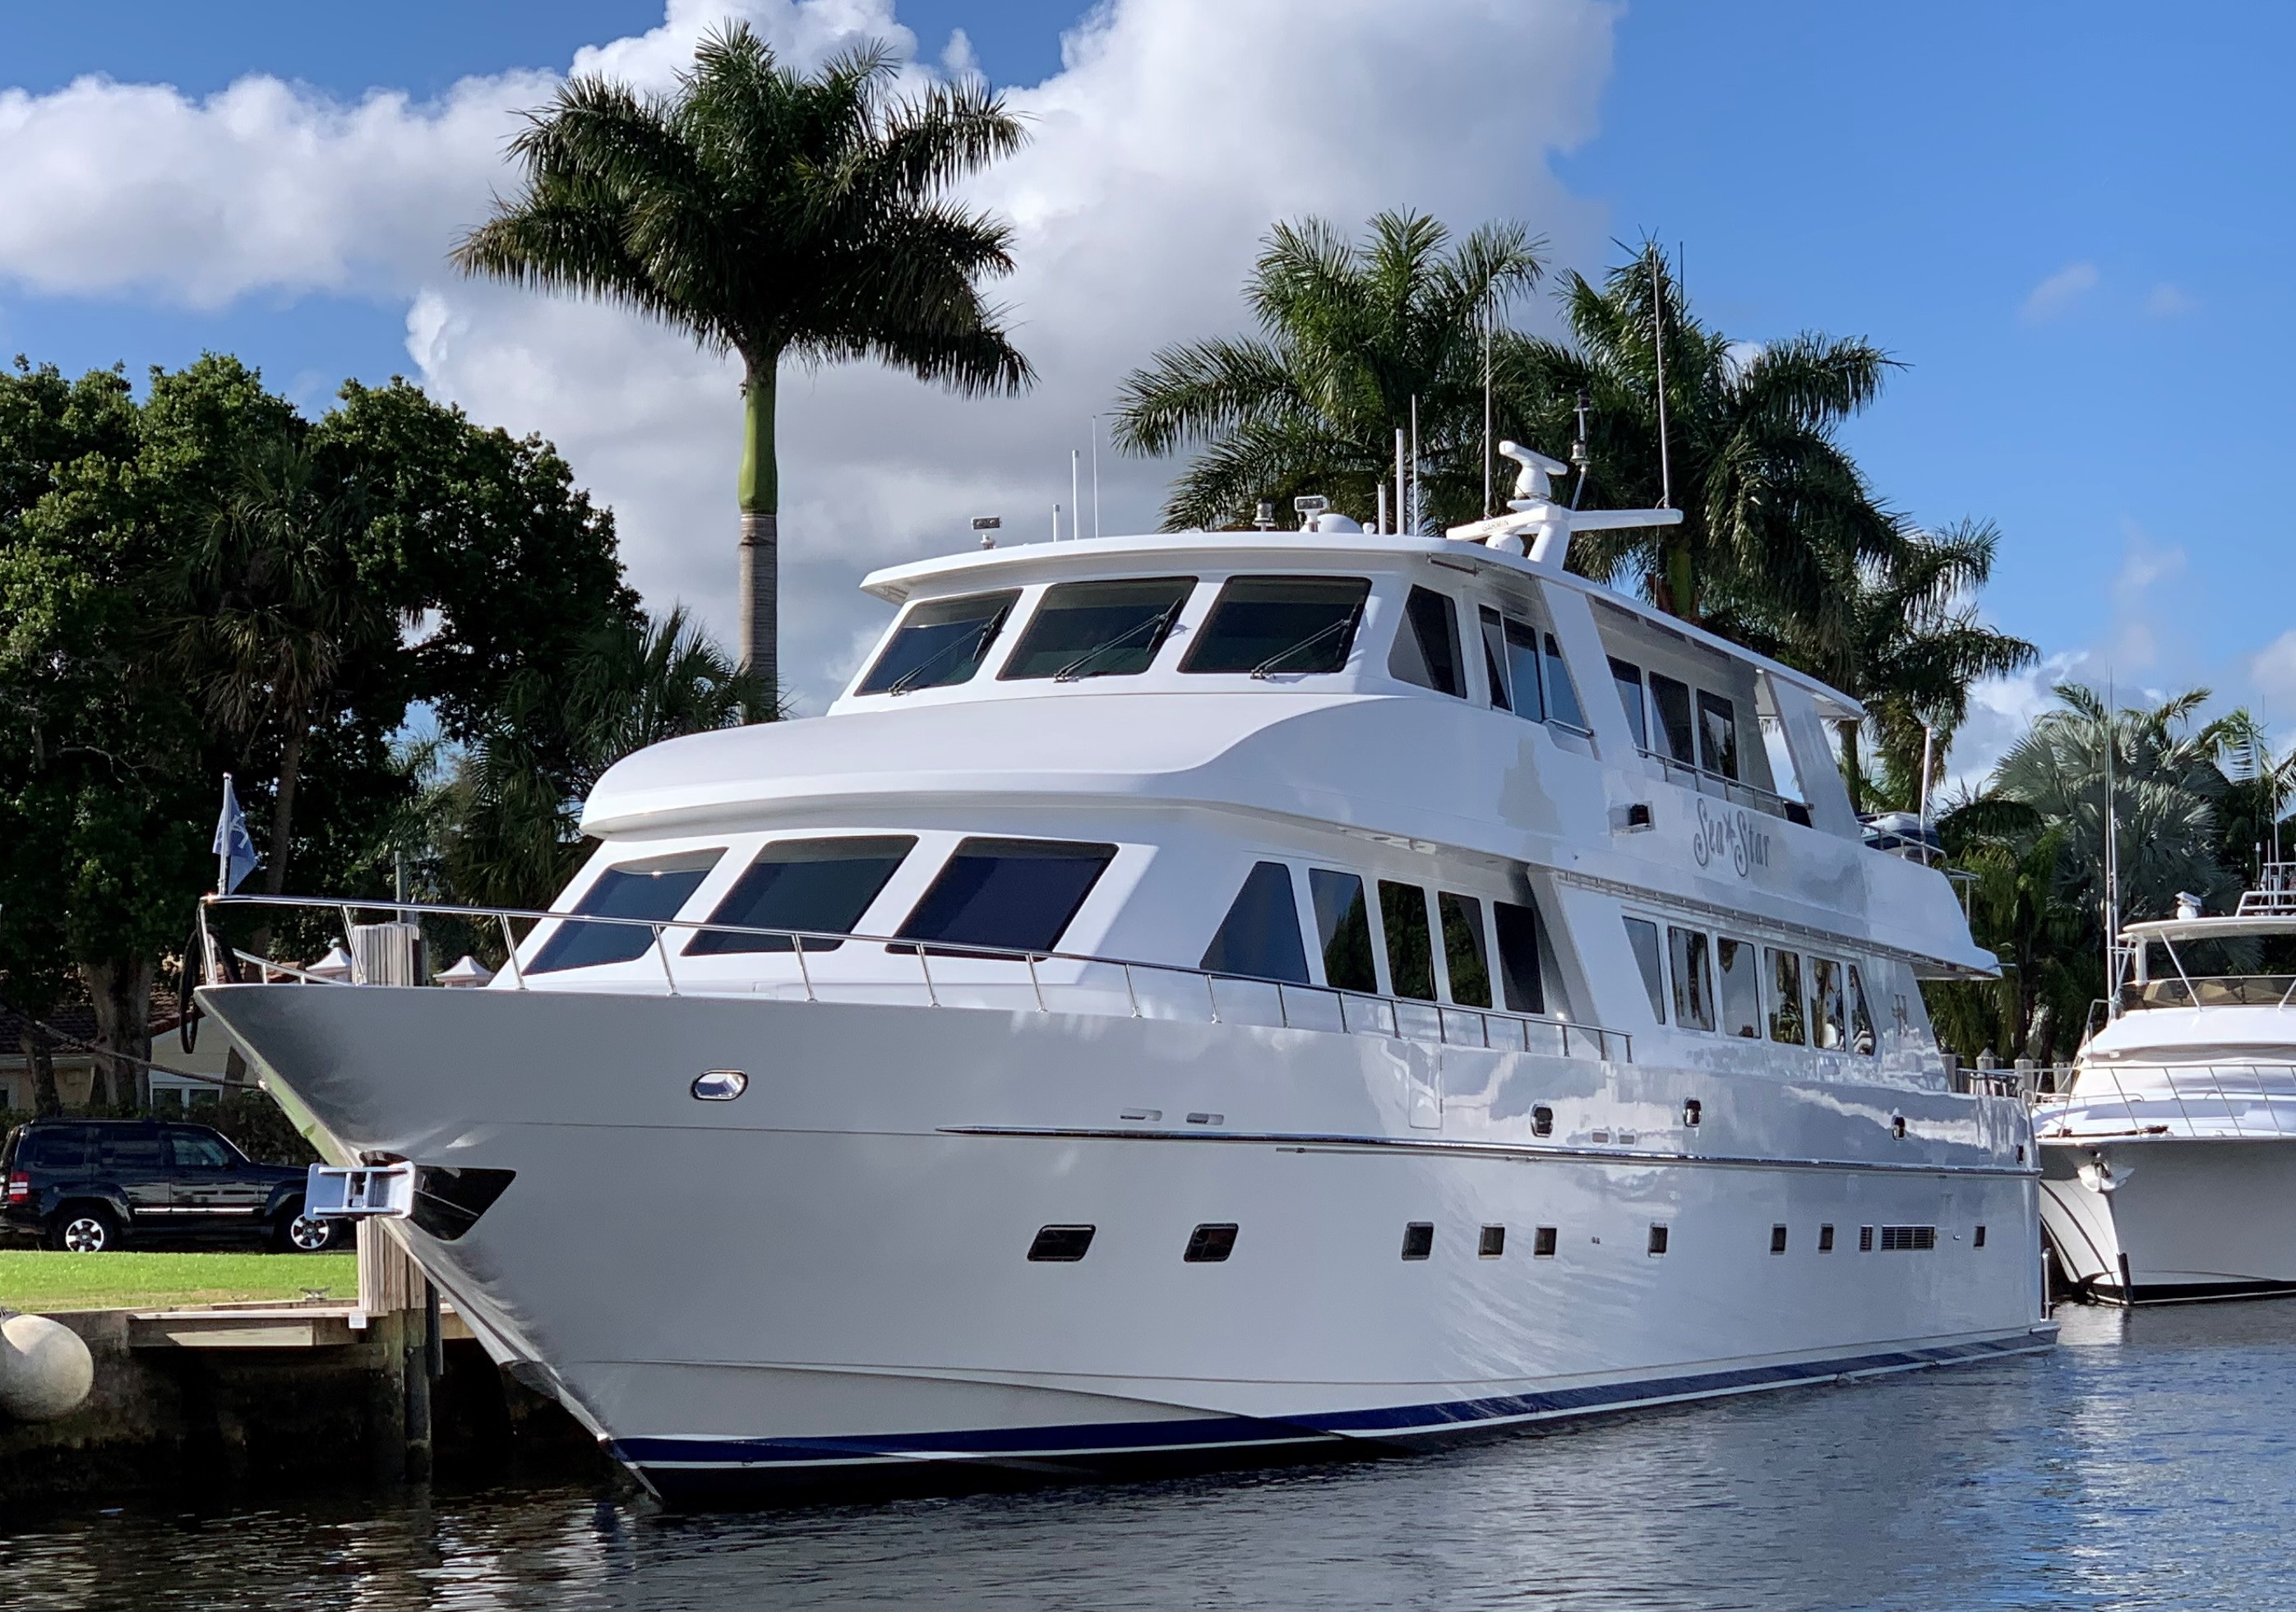 Sea Star charter specs and number of guests